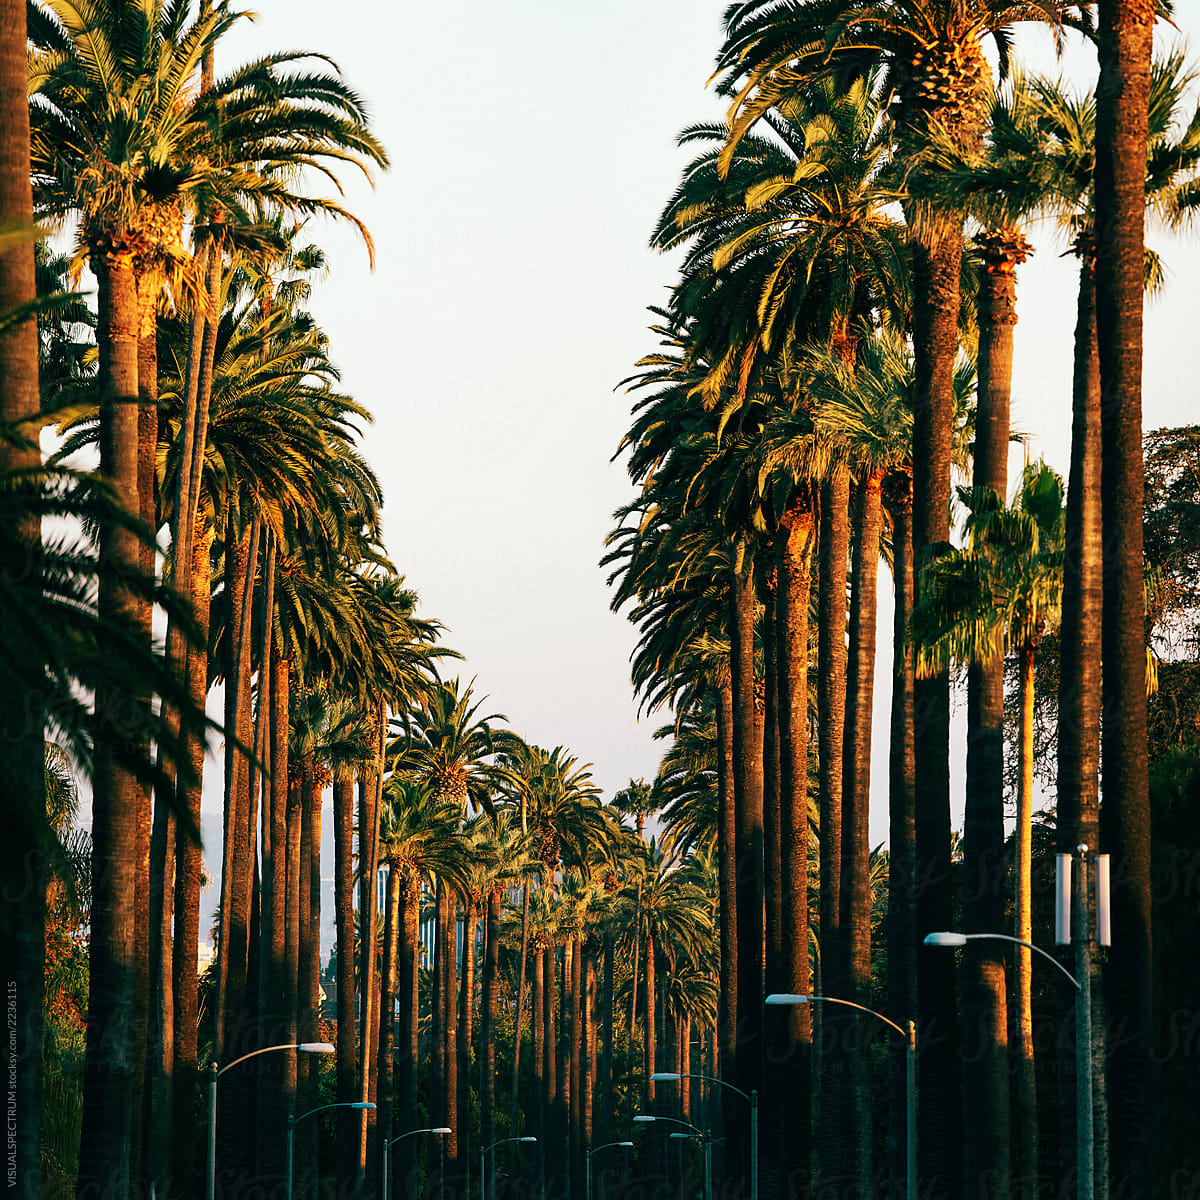 Los Angeles Palm Trees in Warm Sunset Light by VISUALSPECTRUM - Palm